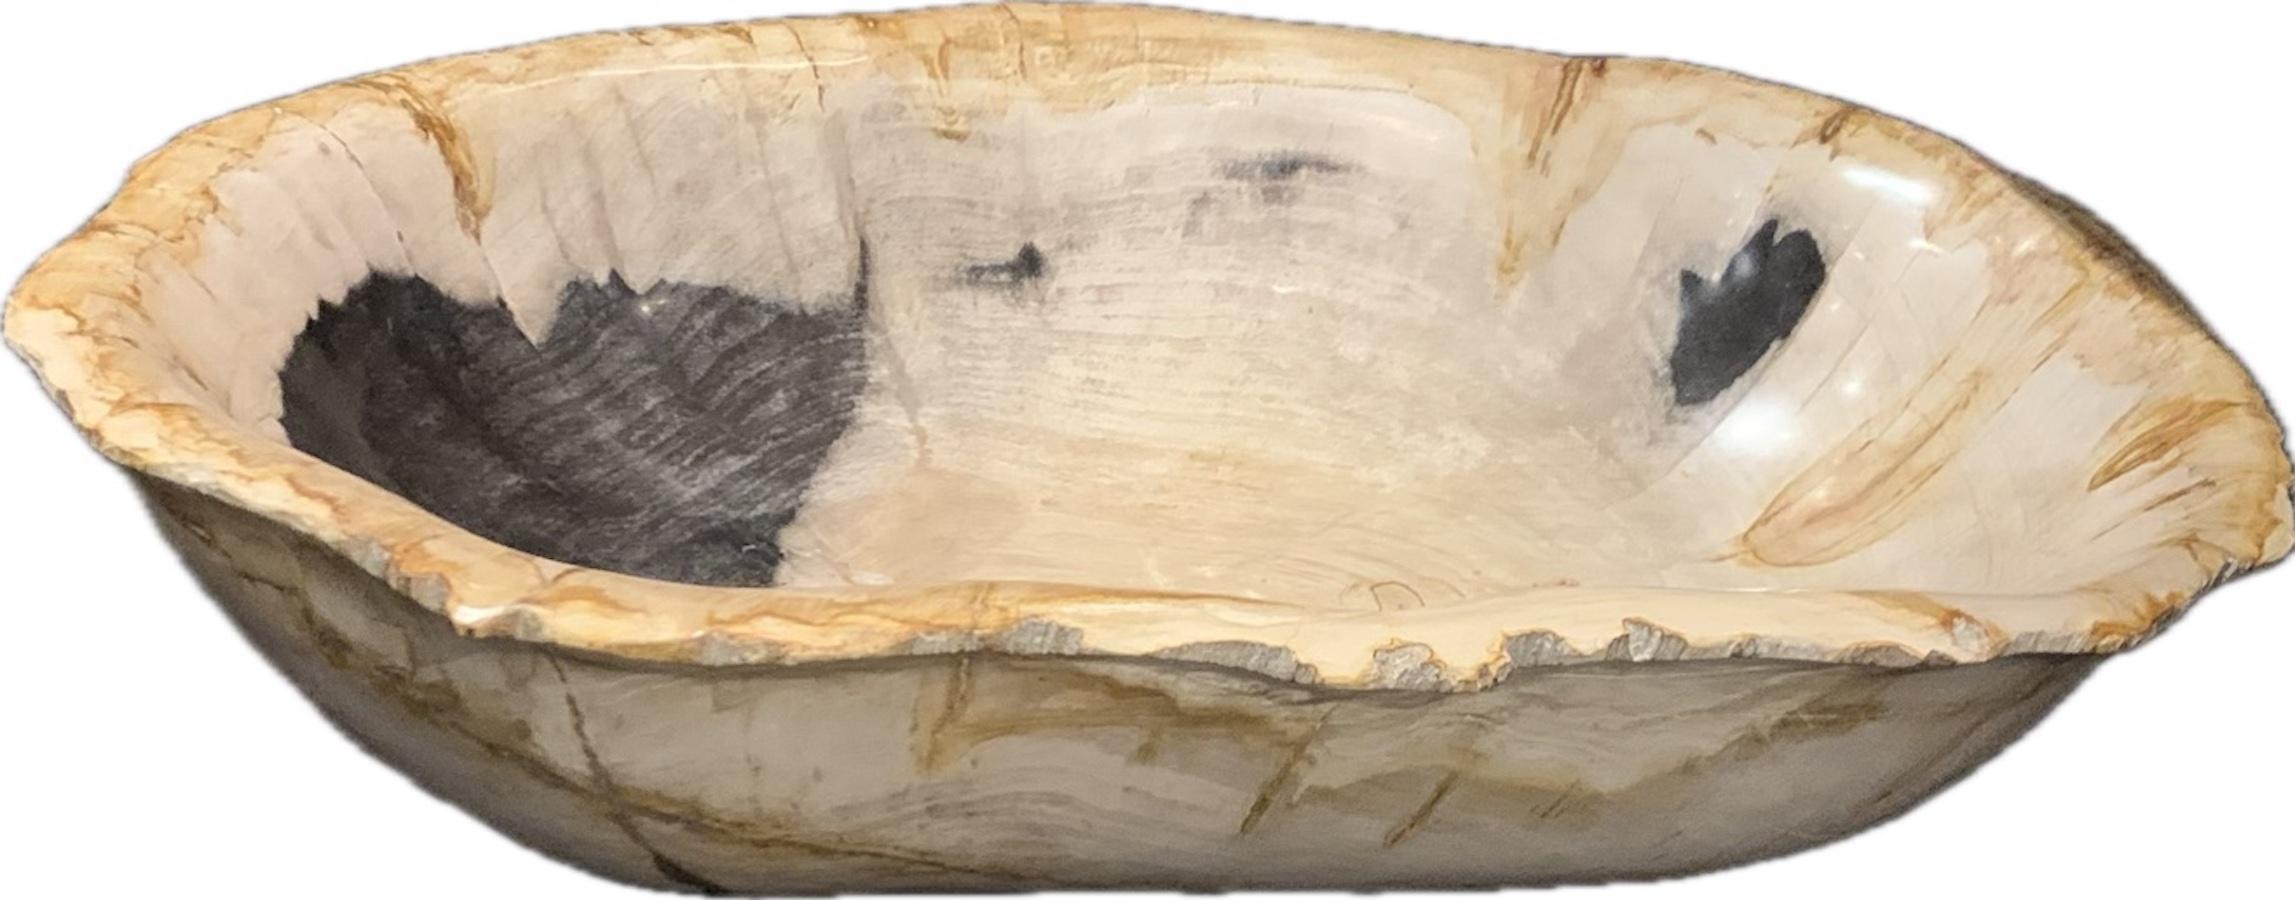 Contemporary Indonesian extra large petrified wood bowl.
Beige with black accents.
From a collection of petrified wood bowls and platters.